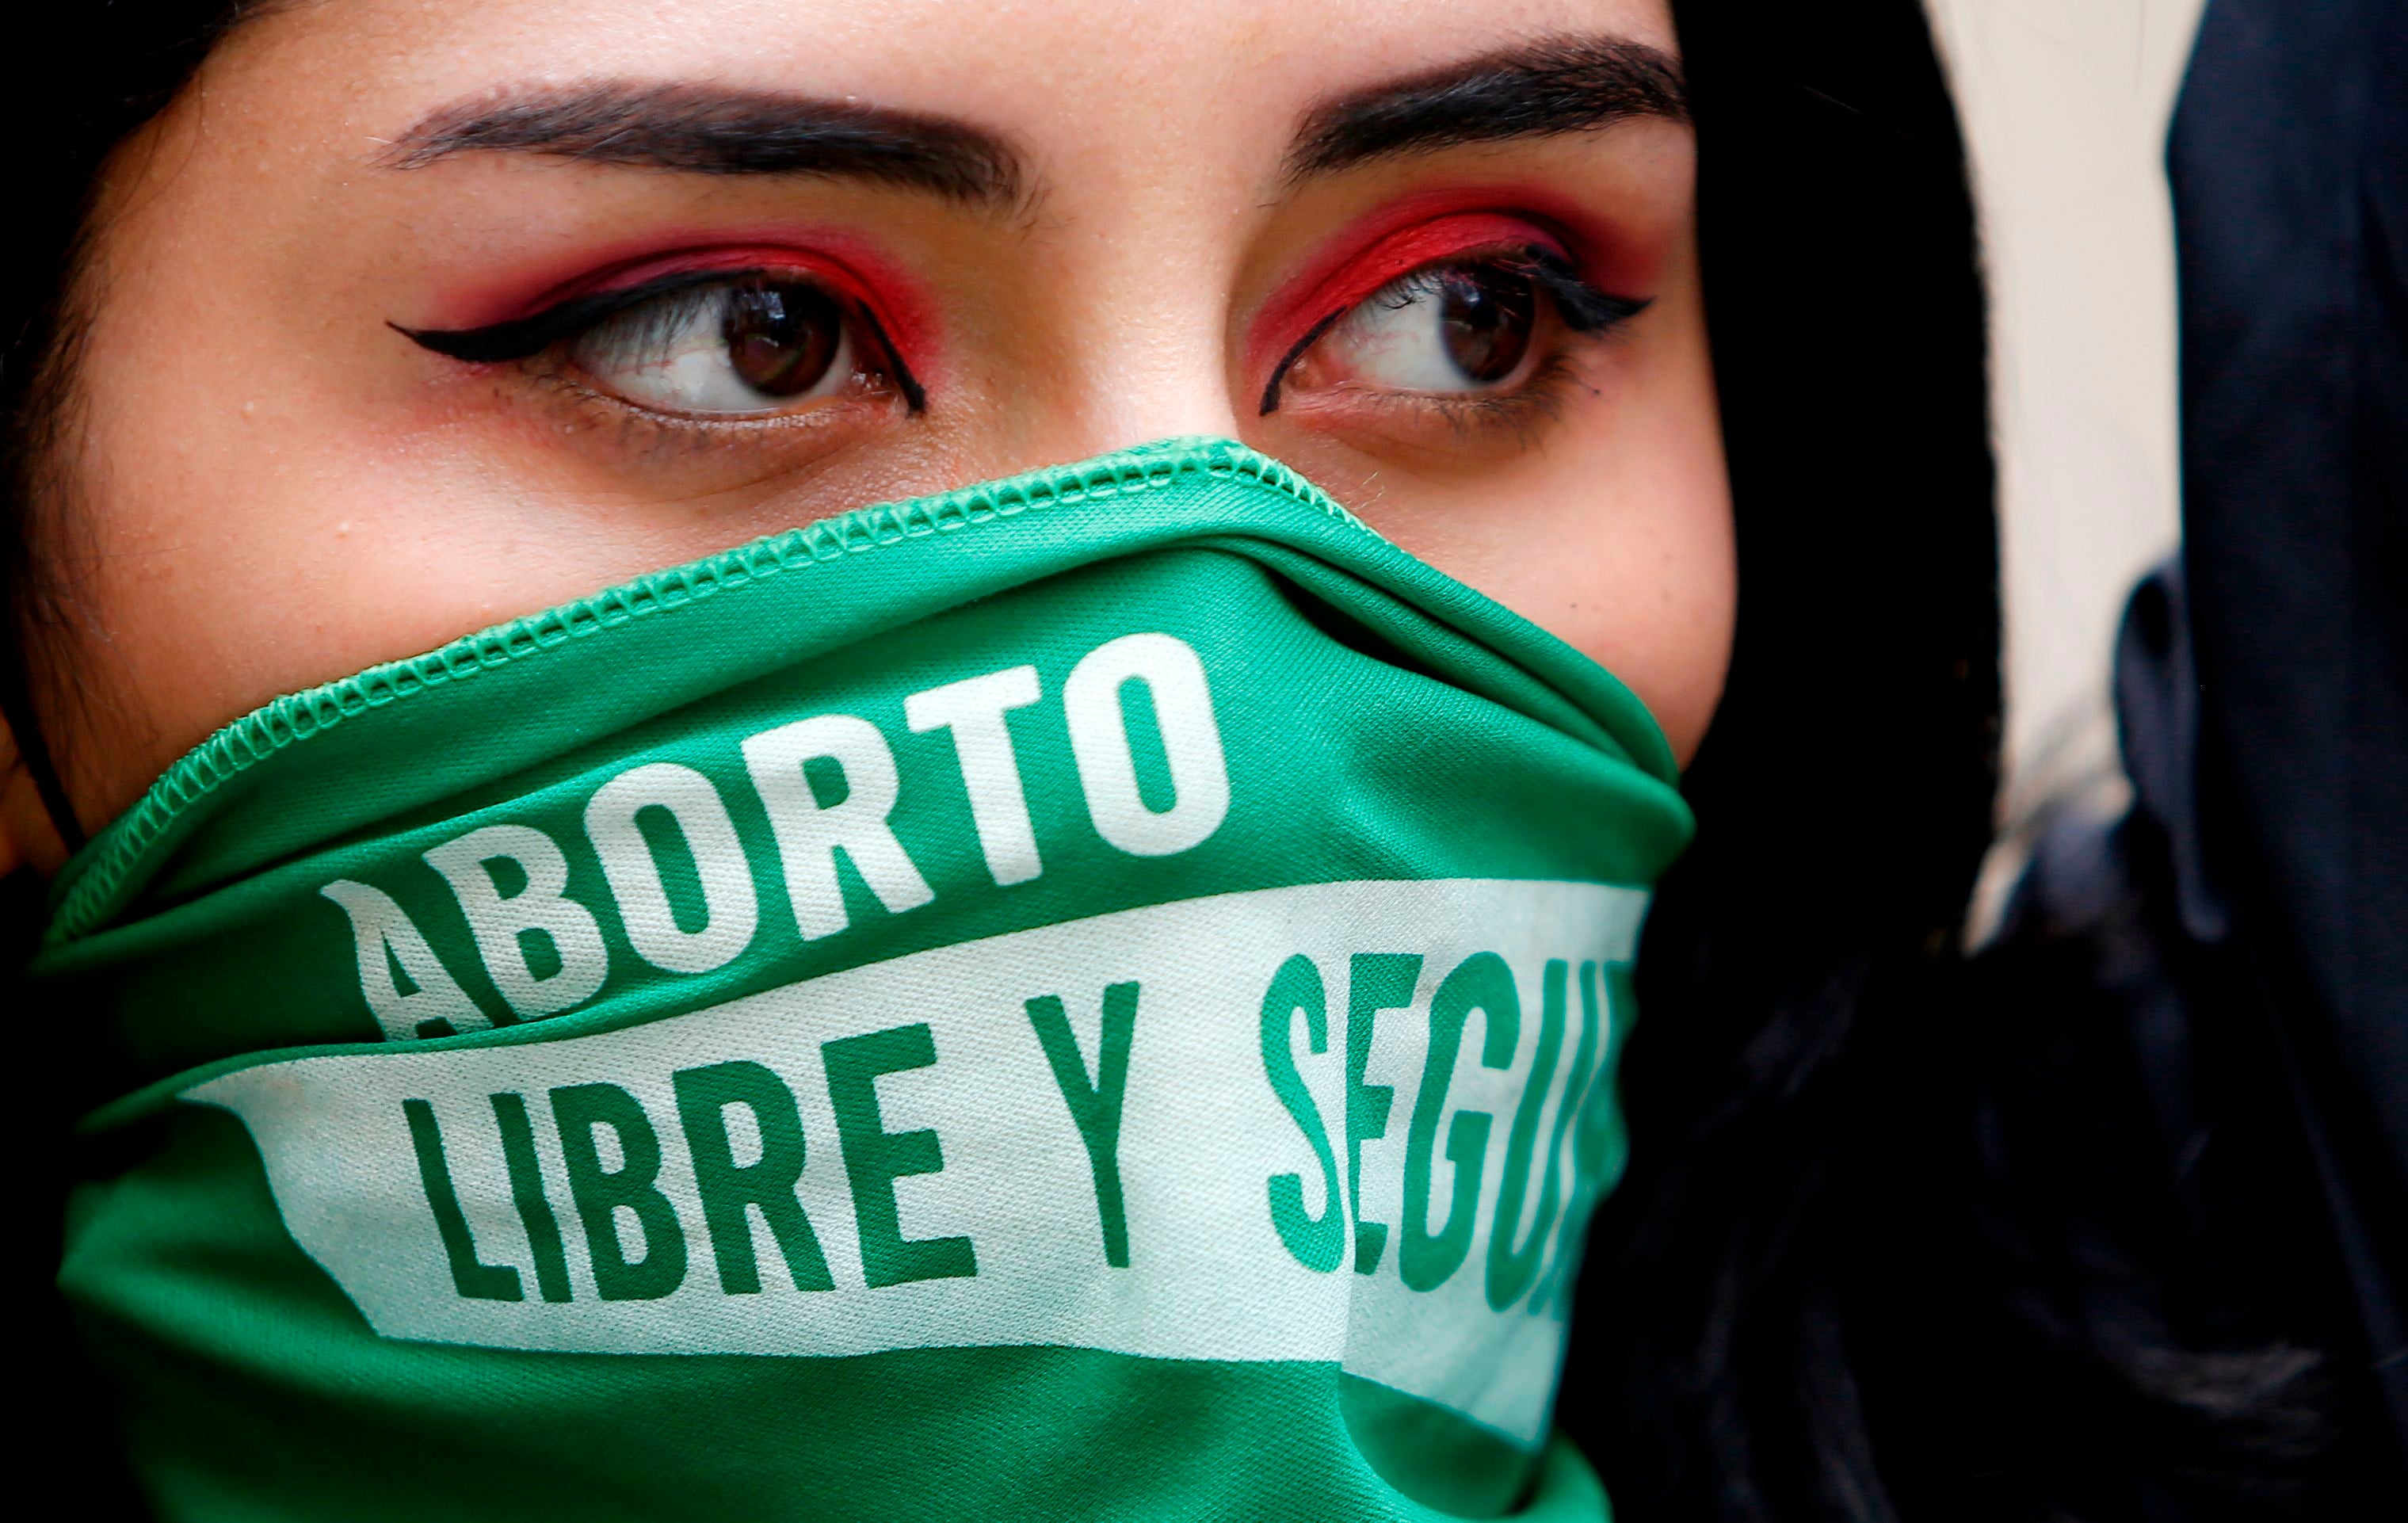 Reproductive rights groups estimate that as many as 400,000 abortions are performed each year in Colombia, with only a very small fraction being carried out legally